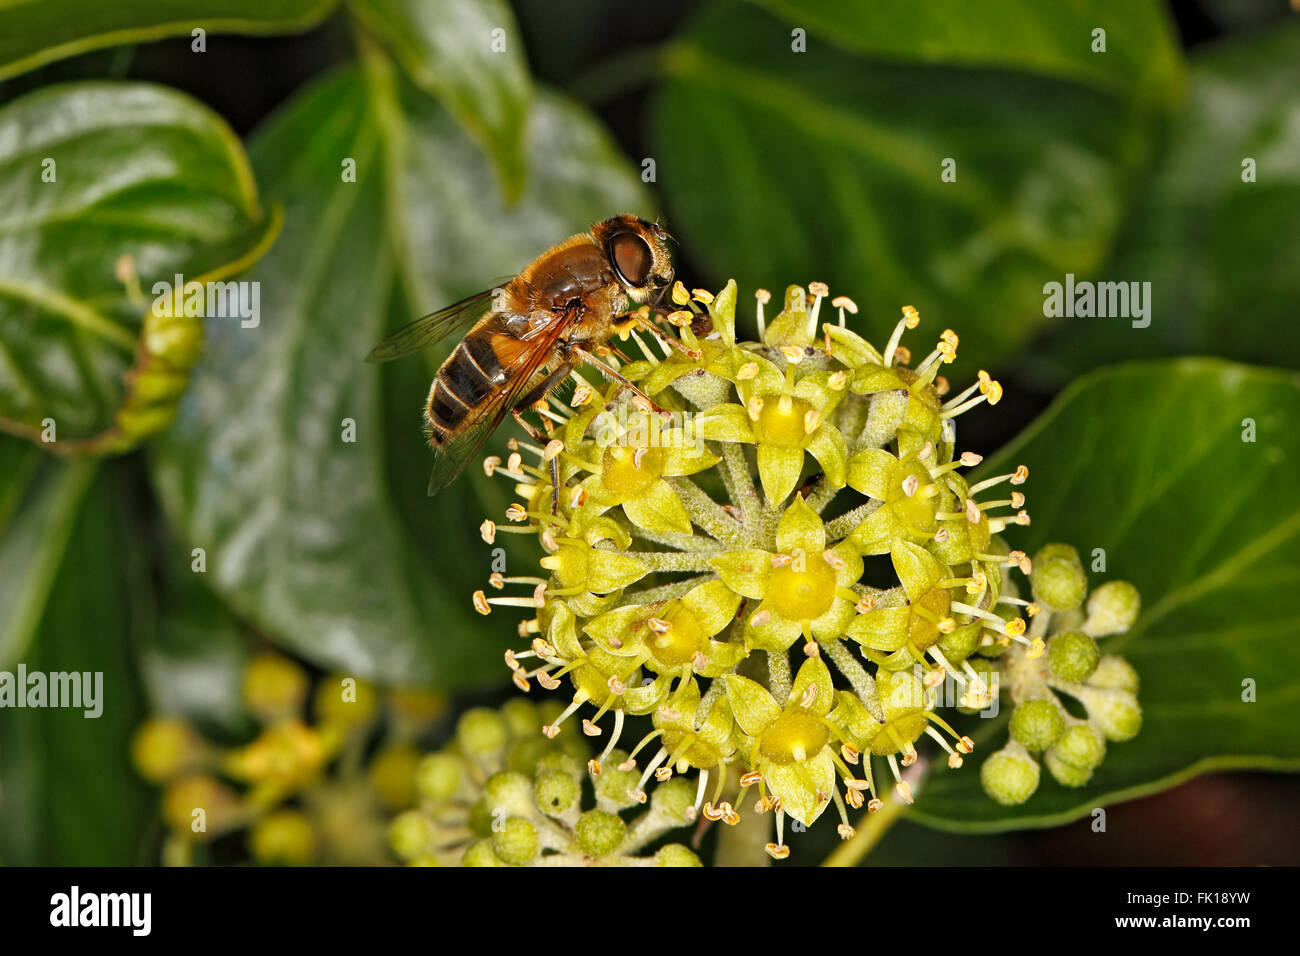 Hoverfly (Eristalis species) feeding on Ivy (Hedera helix) flower growing on wall Cheshire UK September 3743 Stock Photo